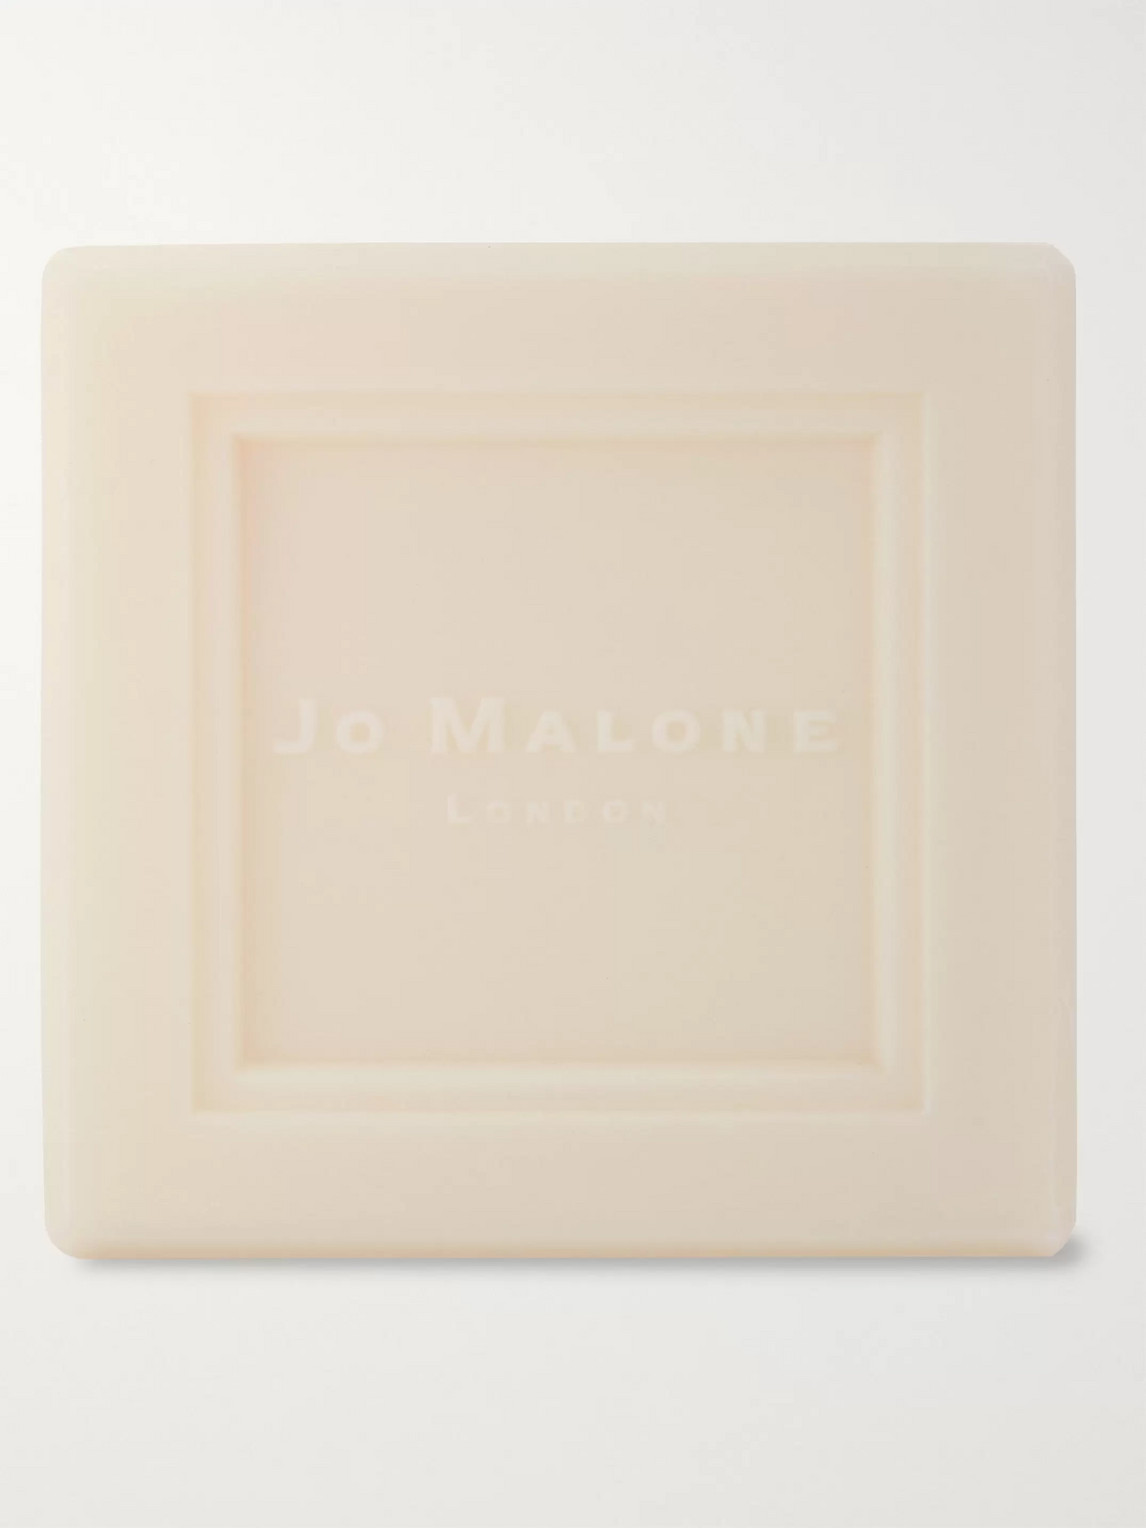 JO MALONE LONDON RED ROSES SOAP, 100G